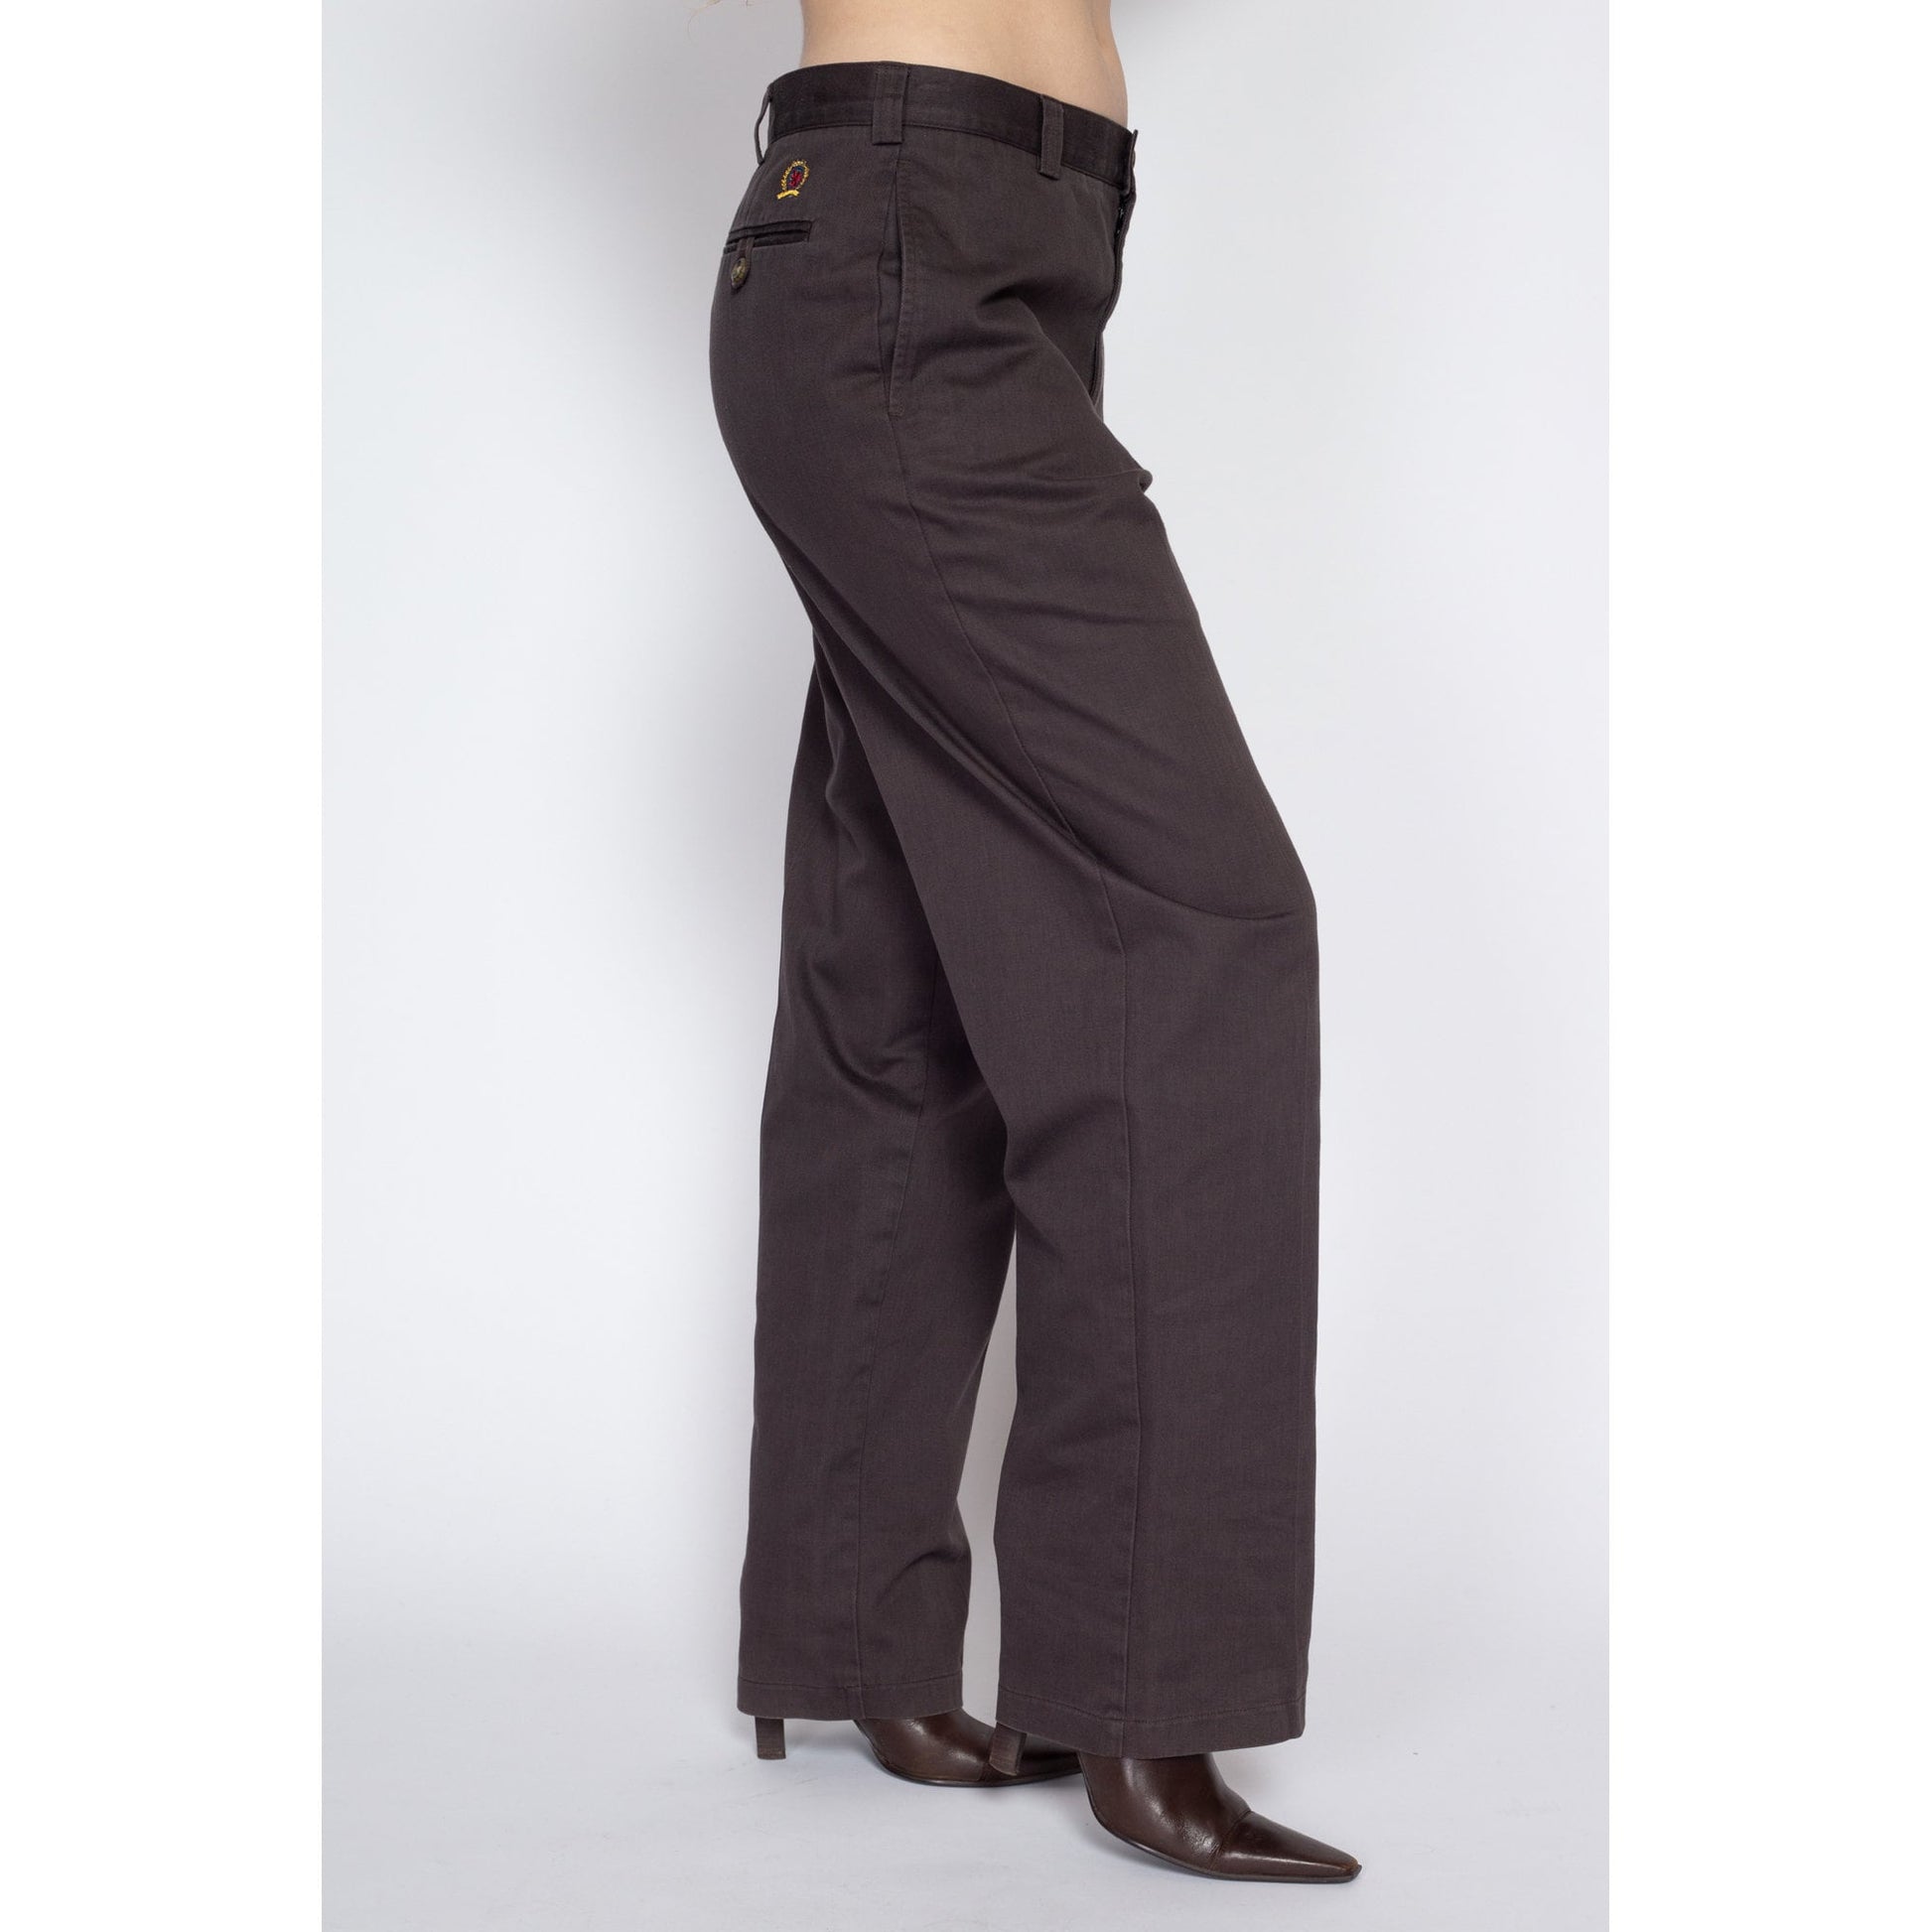 Chocolate brown high waisted flat-front regular fit Women Trousers